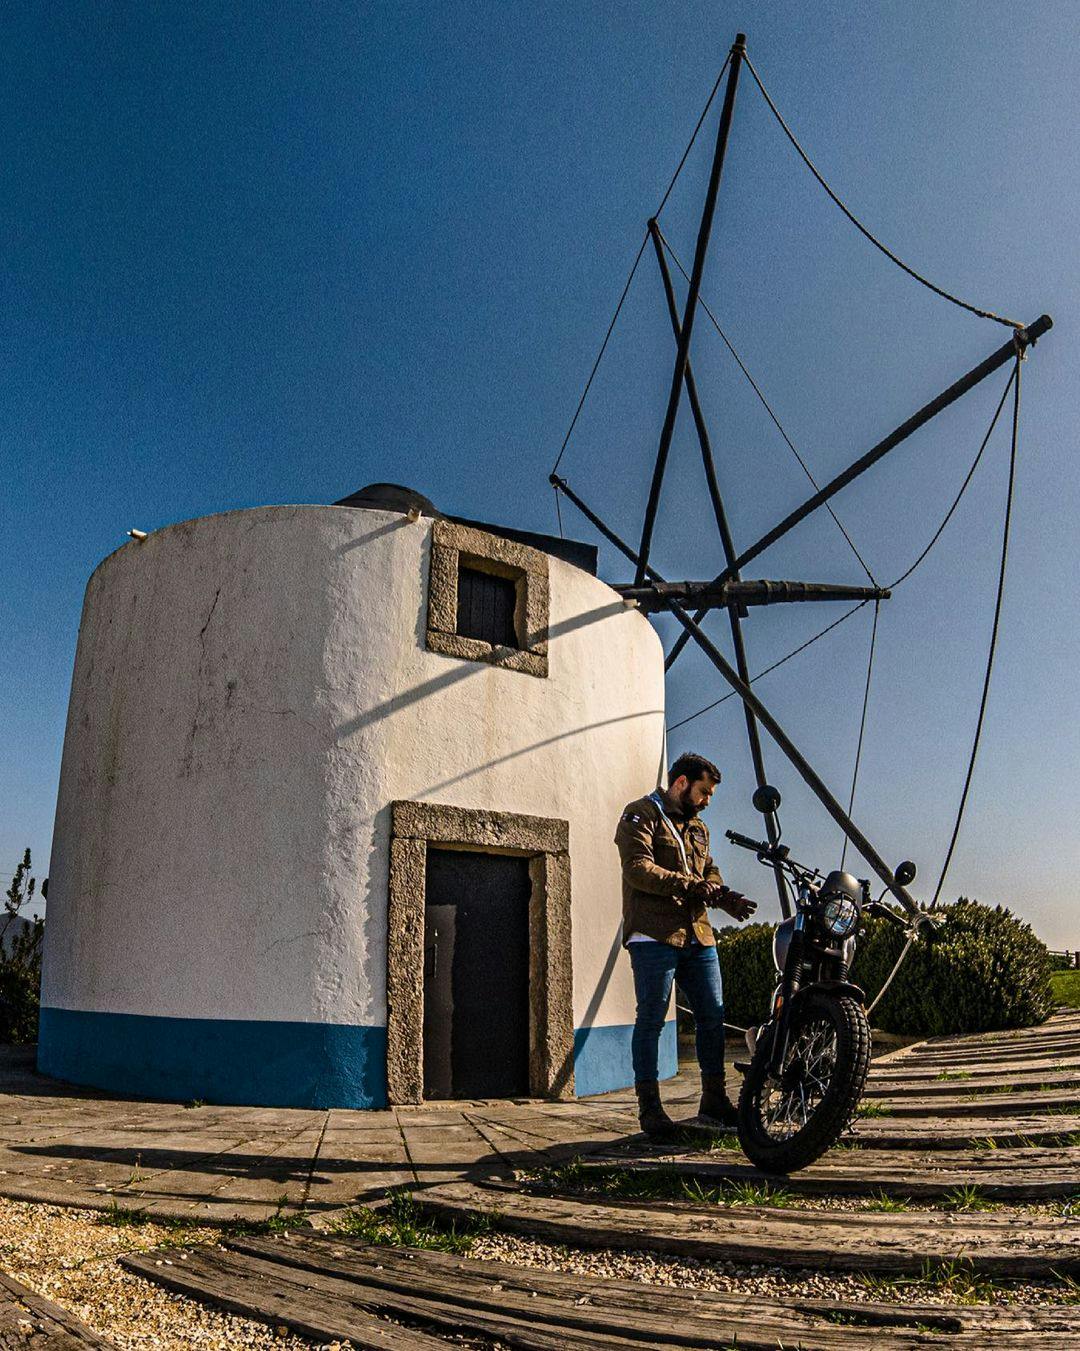 Rider of the Month John with his Brixton Felsberg 125 parked in front of an old windmill